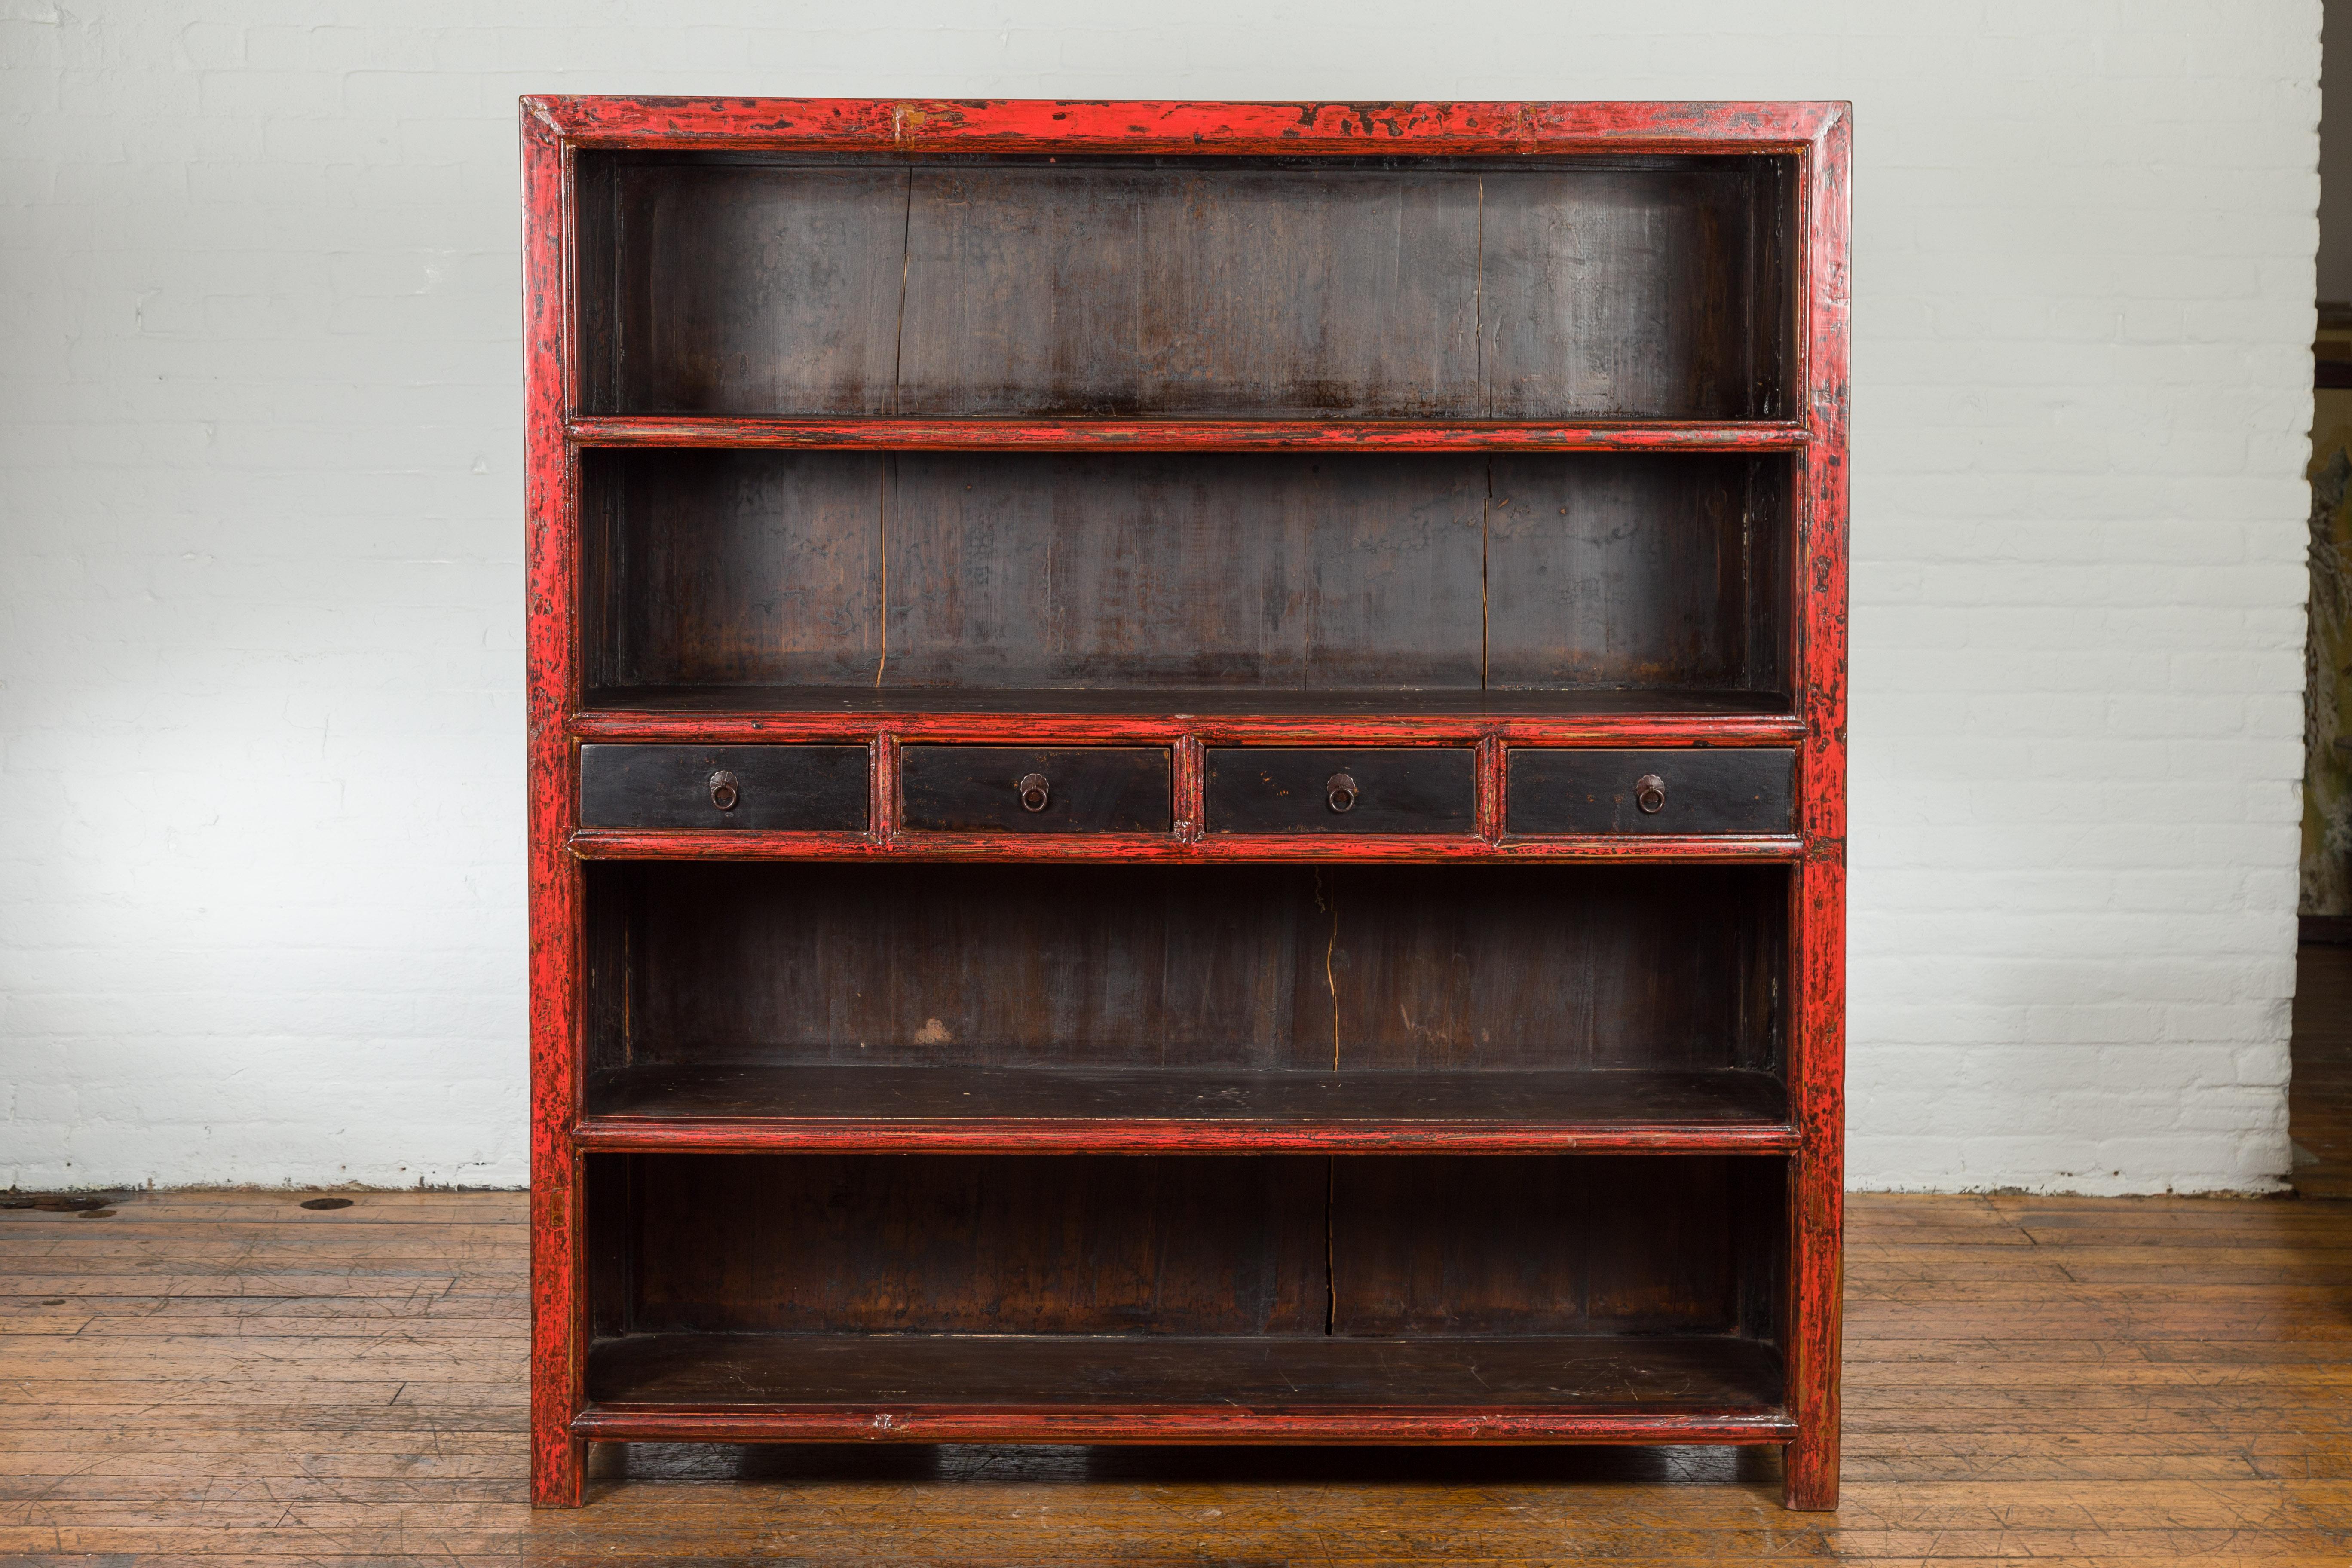 A Chinese Qing Dynasty period large bookcase from the 19th century with red and dark brown lacquer. Immerse yourself in the vibrant allure of traditional Chinese craftsmanship with this 19th-century Qing Dynasty bookcase. Crafted with precision and